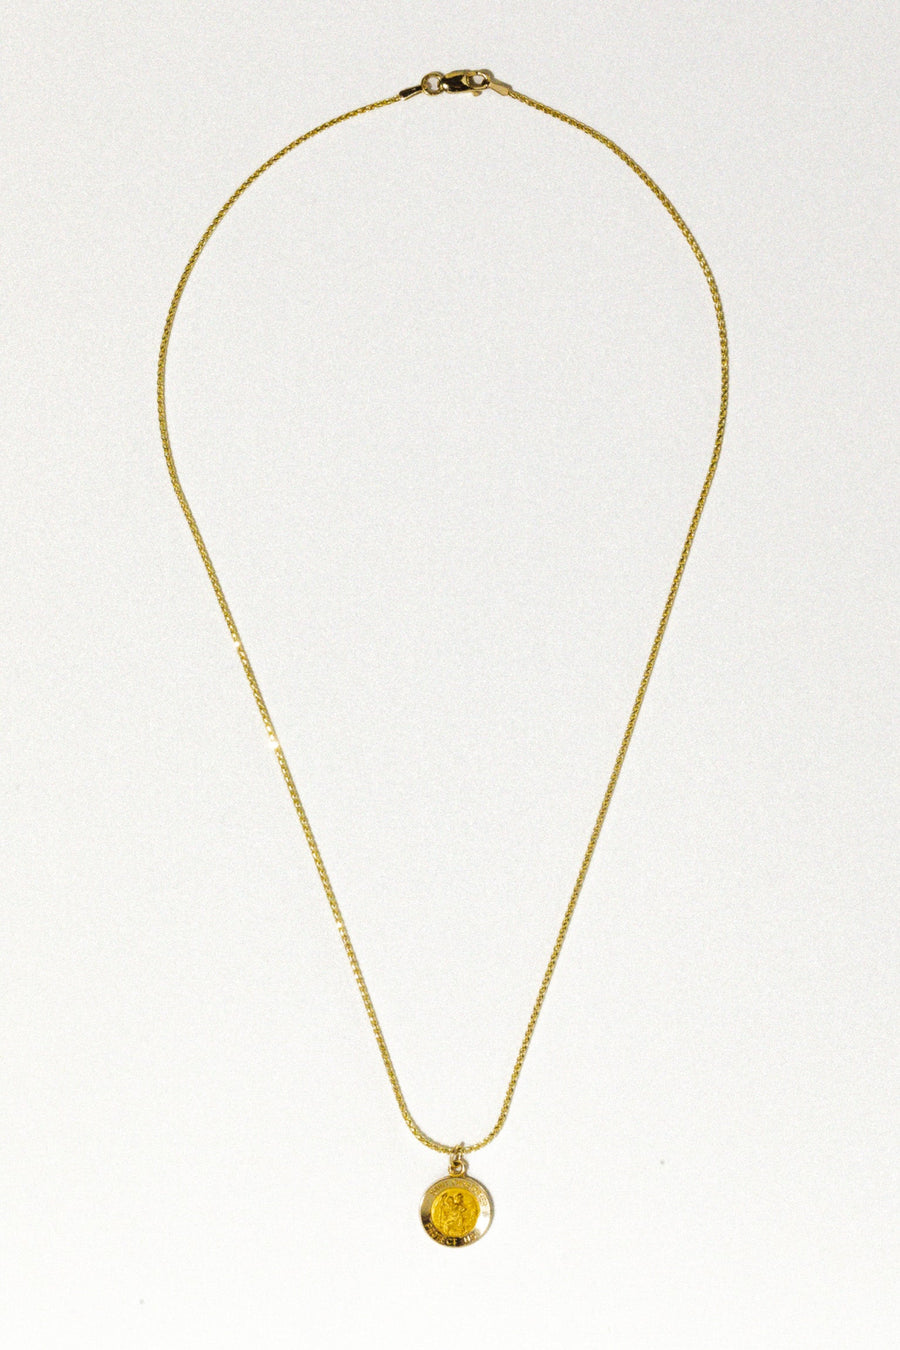 Stuller Jewelry Gold / 16 Inches 14kt Golden Protection Necklace